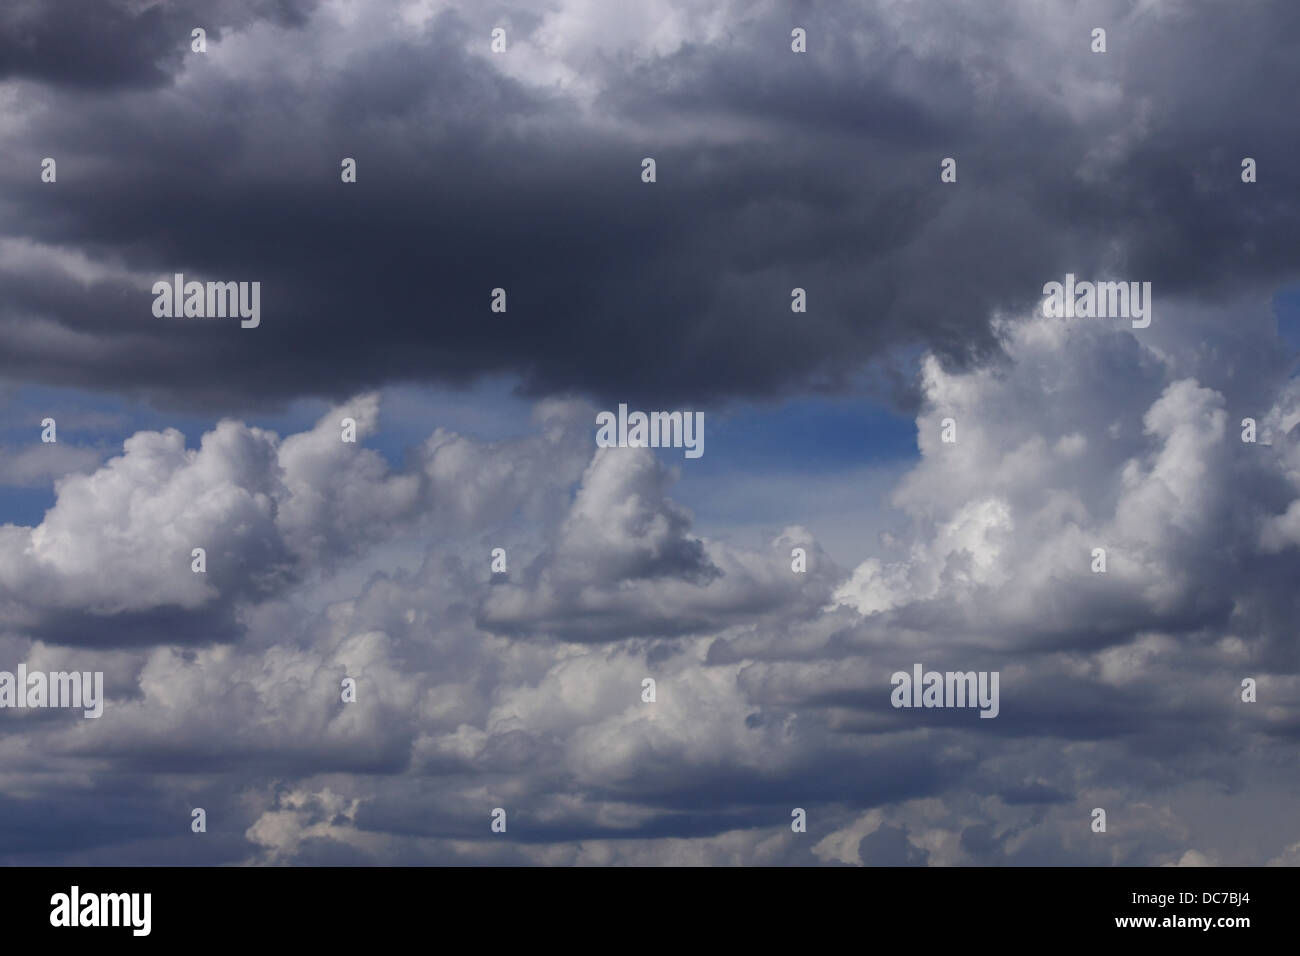 view on rain clouds in a sky Stock Photo